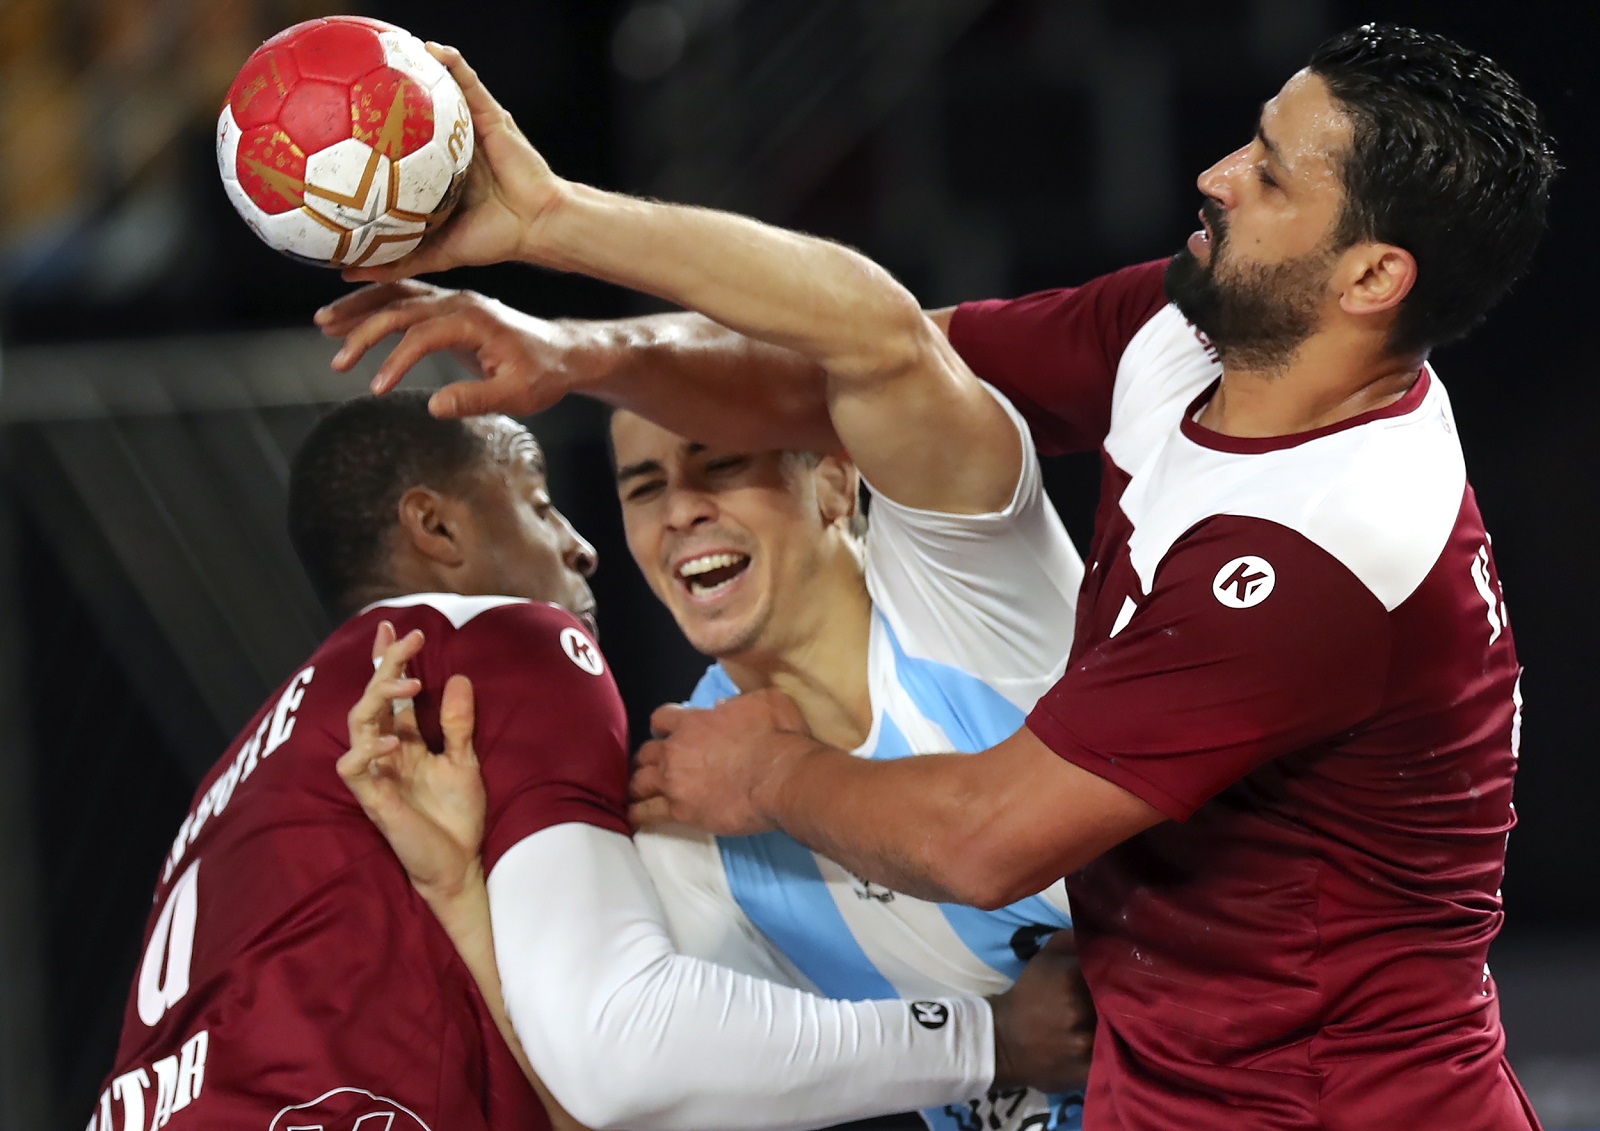 epa08964824 Diego Esteban Simonet (C) of Argentina in action during the Main Round match between Argentina and Qatar at the 27th Men's Handball World Championship in Cairo, Egypt, 25 January 2021.  EPA/Mohamed Abd El Ghany / POOL